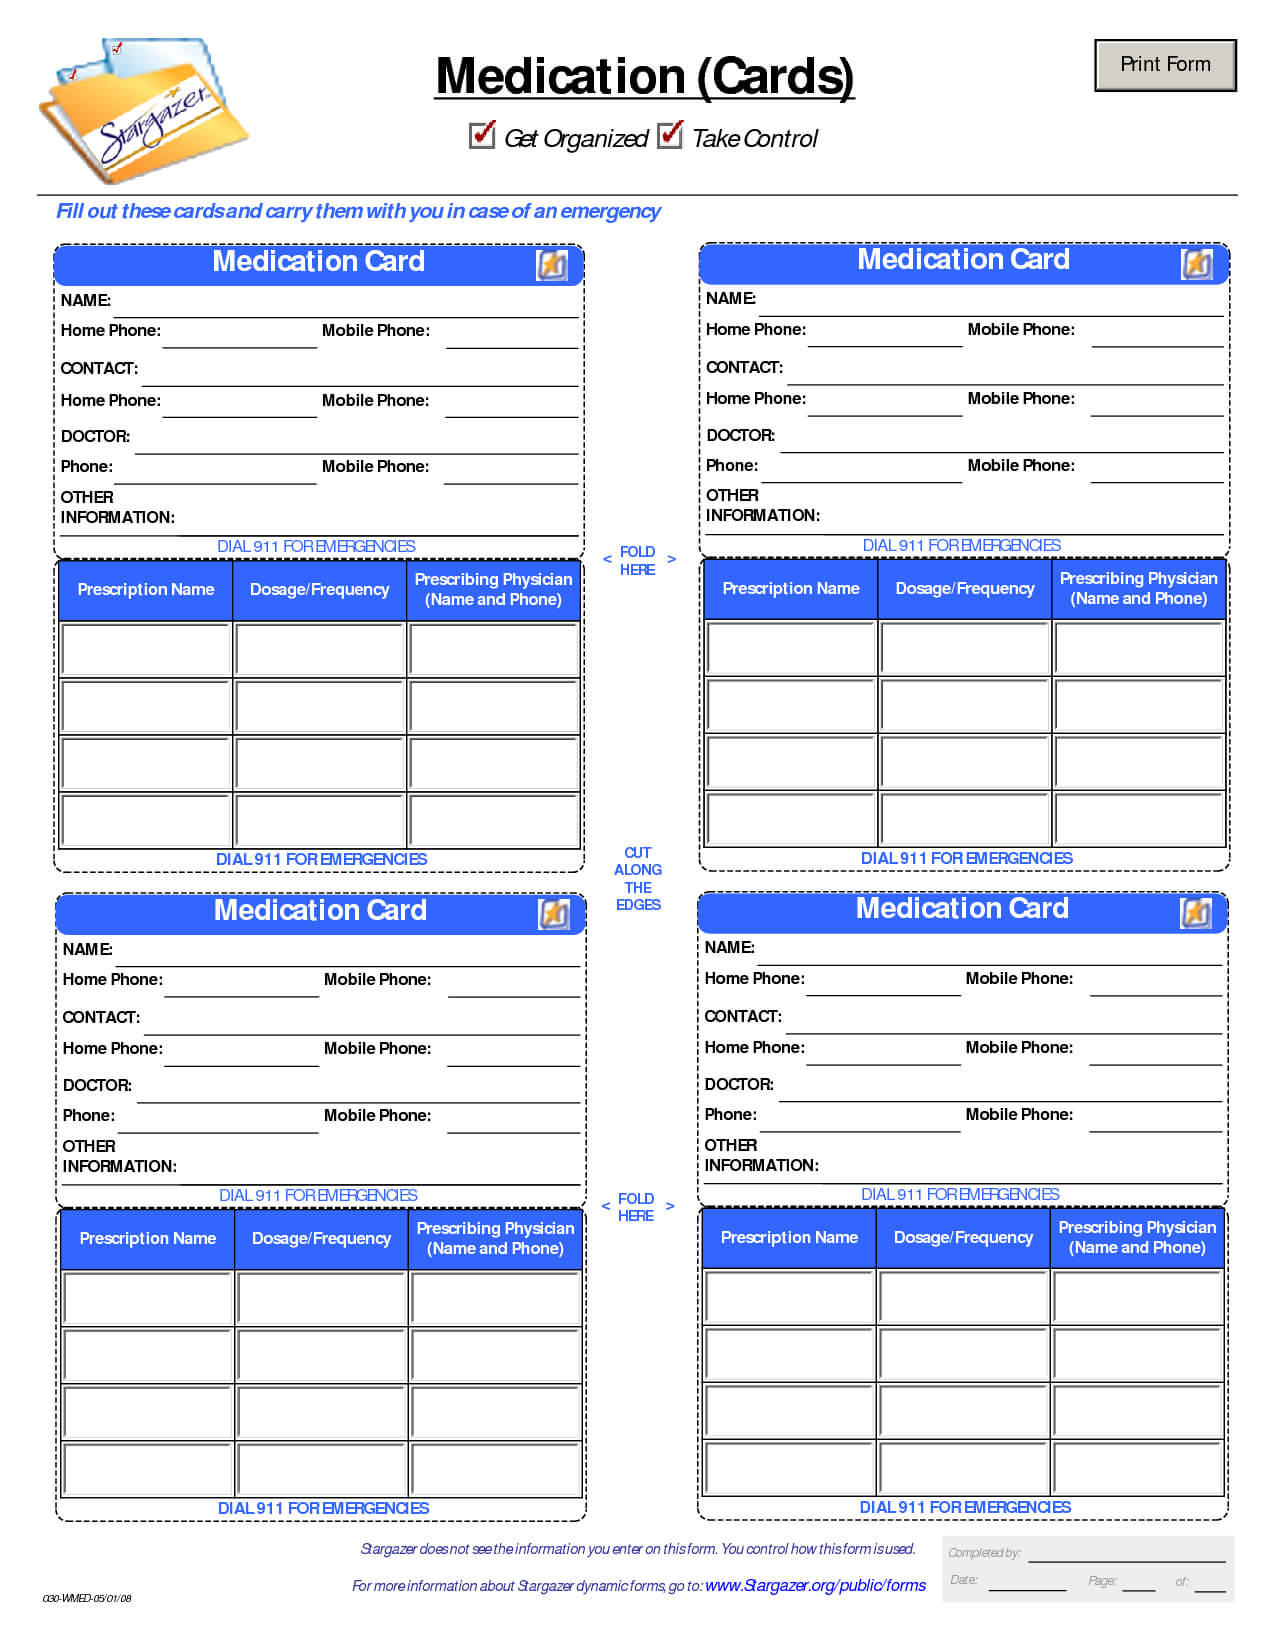 Patient Medication Card Template | Medication List, Medical With Regard To Medication Card Template